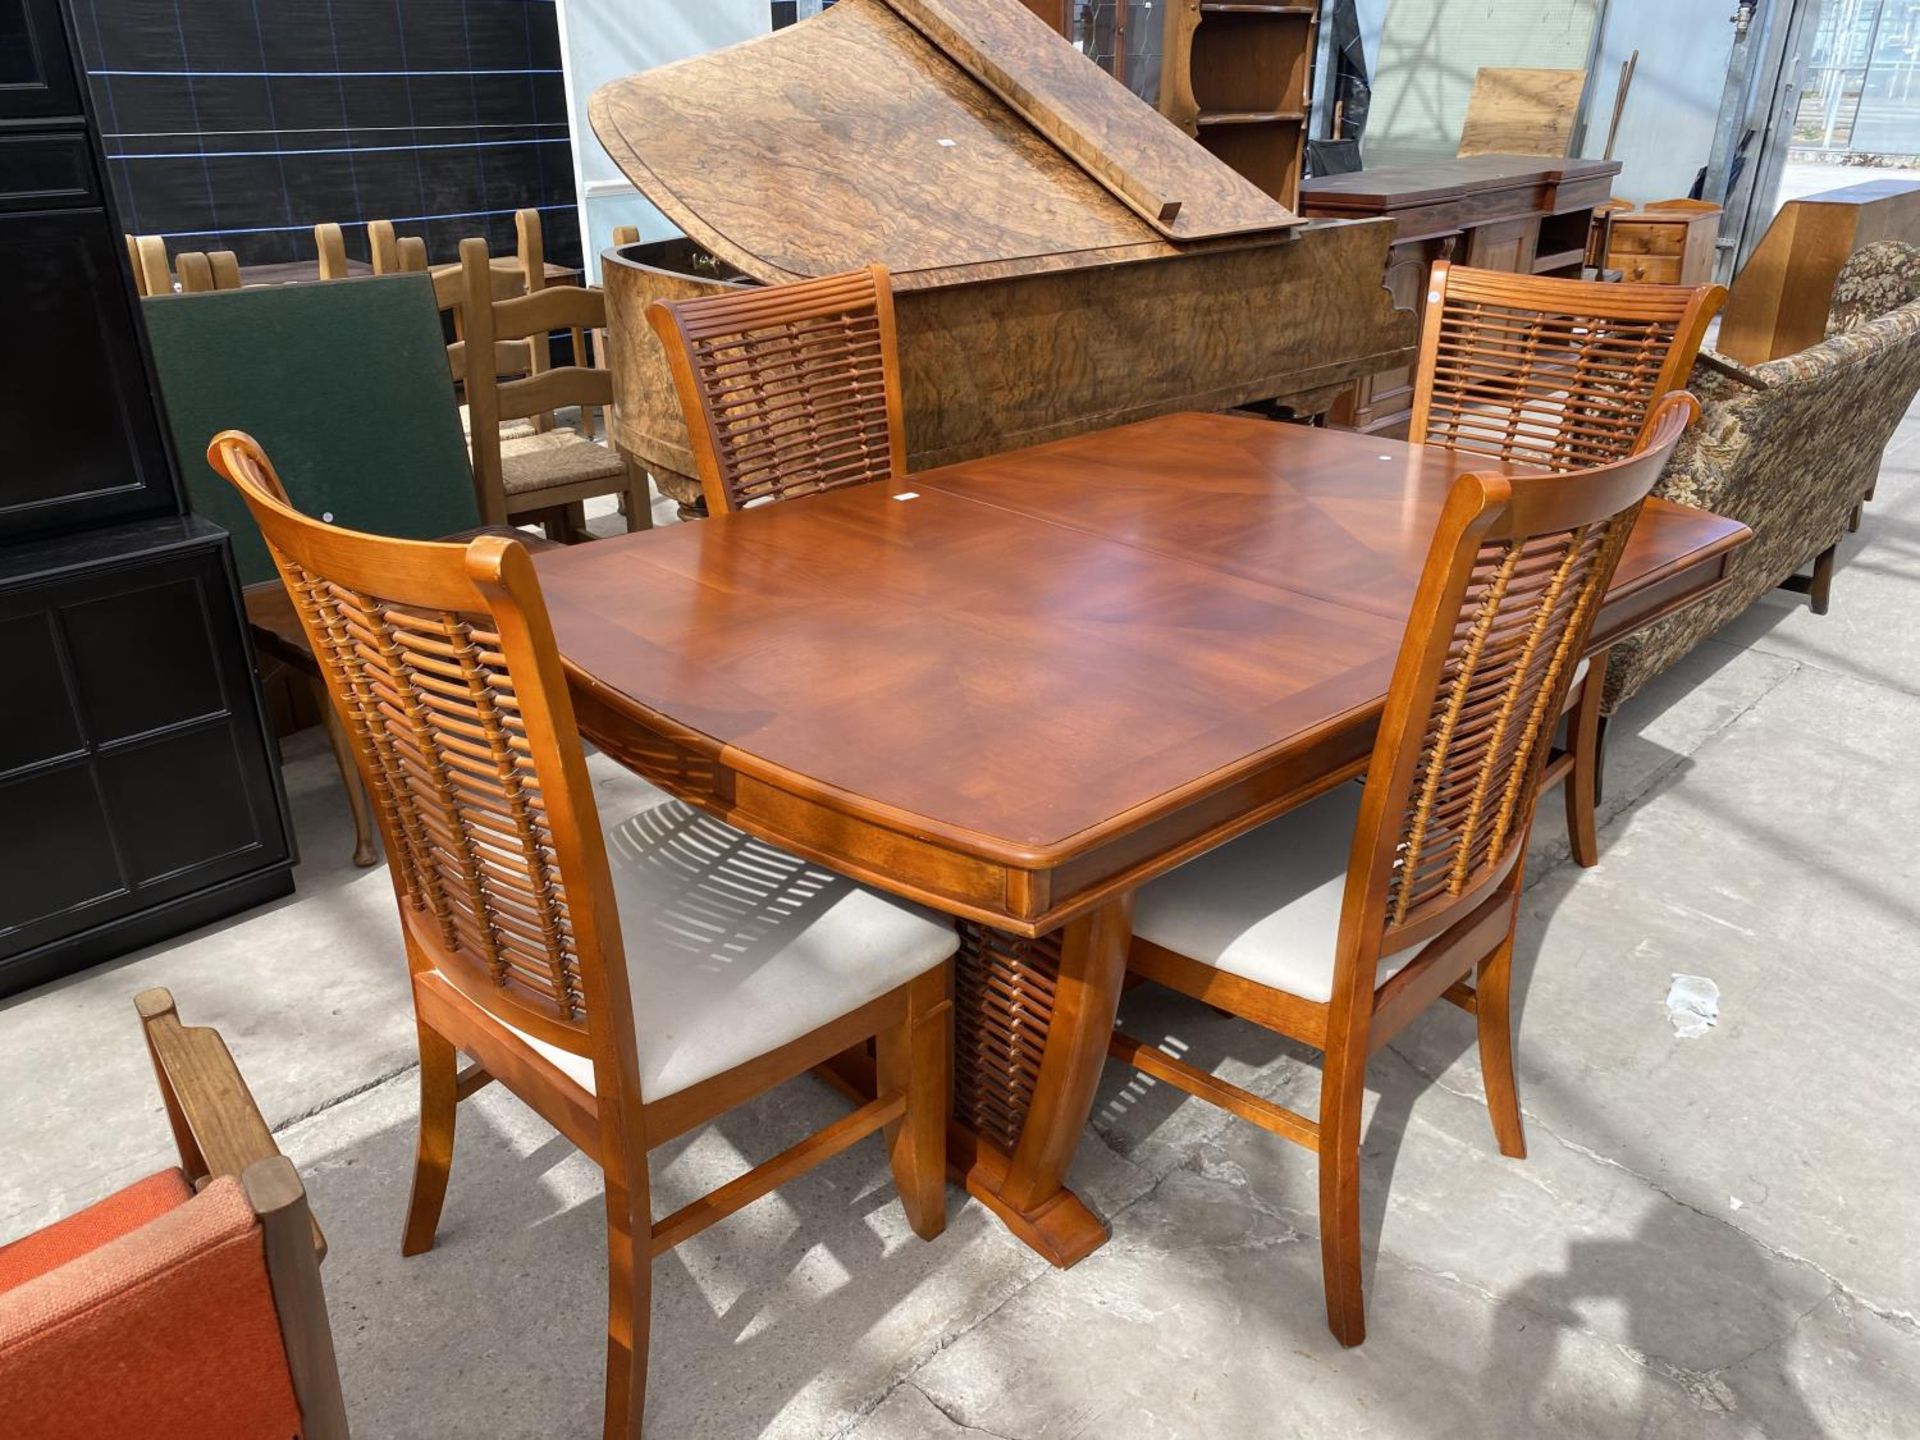 A MODERN YEW WOOD DINING TABLE, 64X42" AND SIX MATCHING CHAIRS WITH RATTAN BACKS